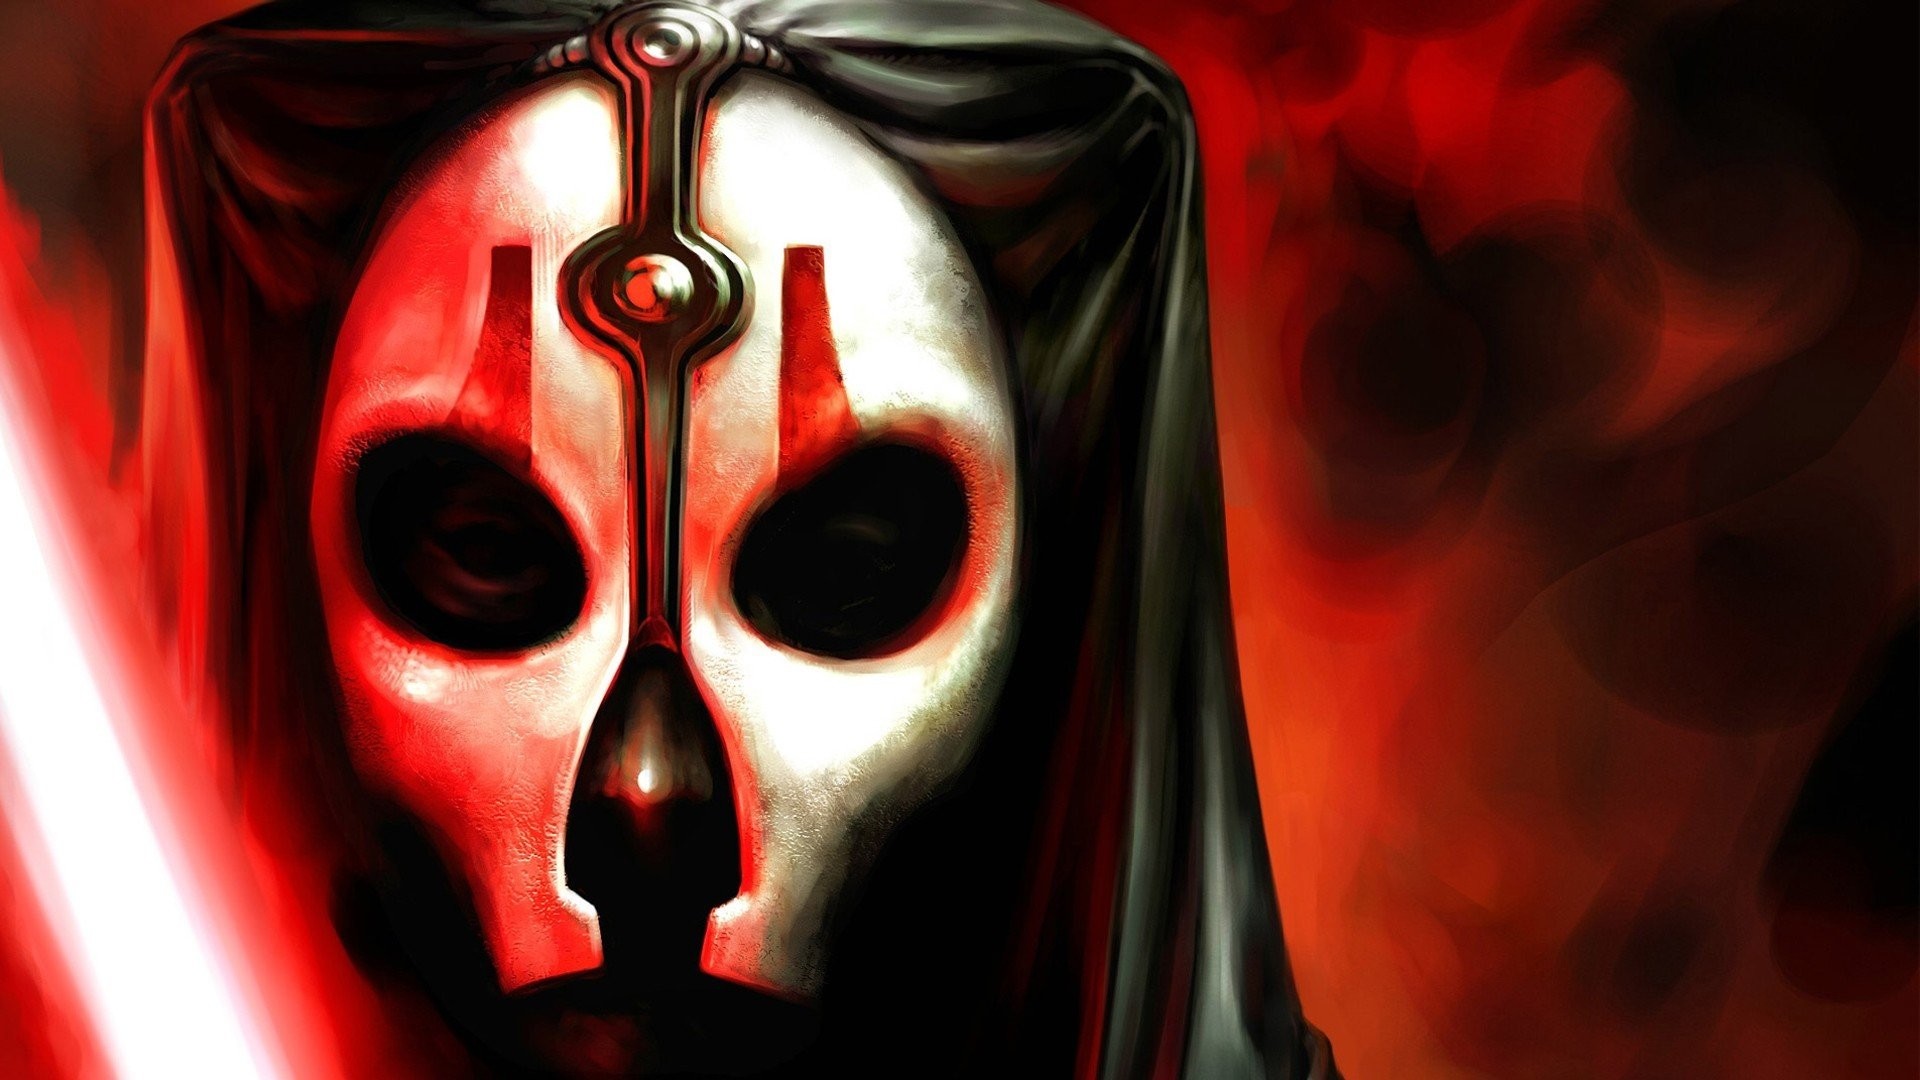 Star Wars Sith Wallpapers Photo As Wallpaper HD